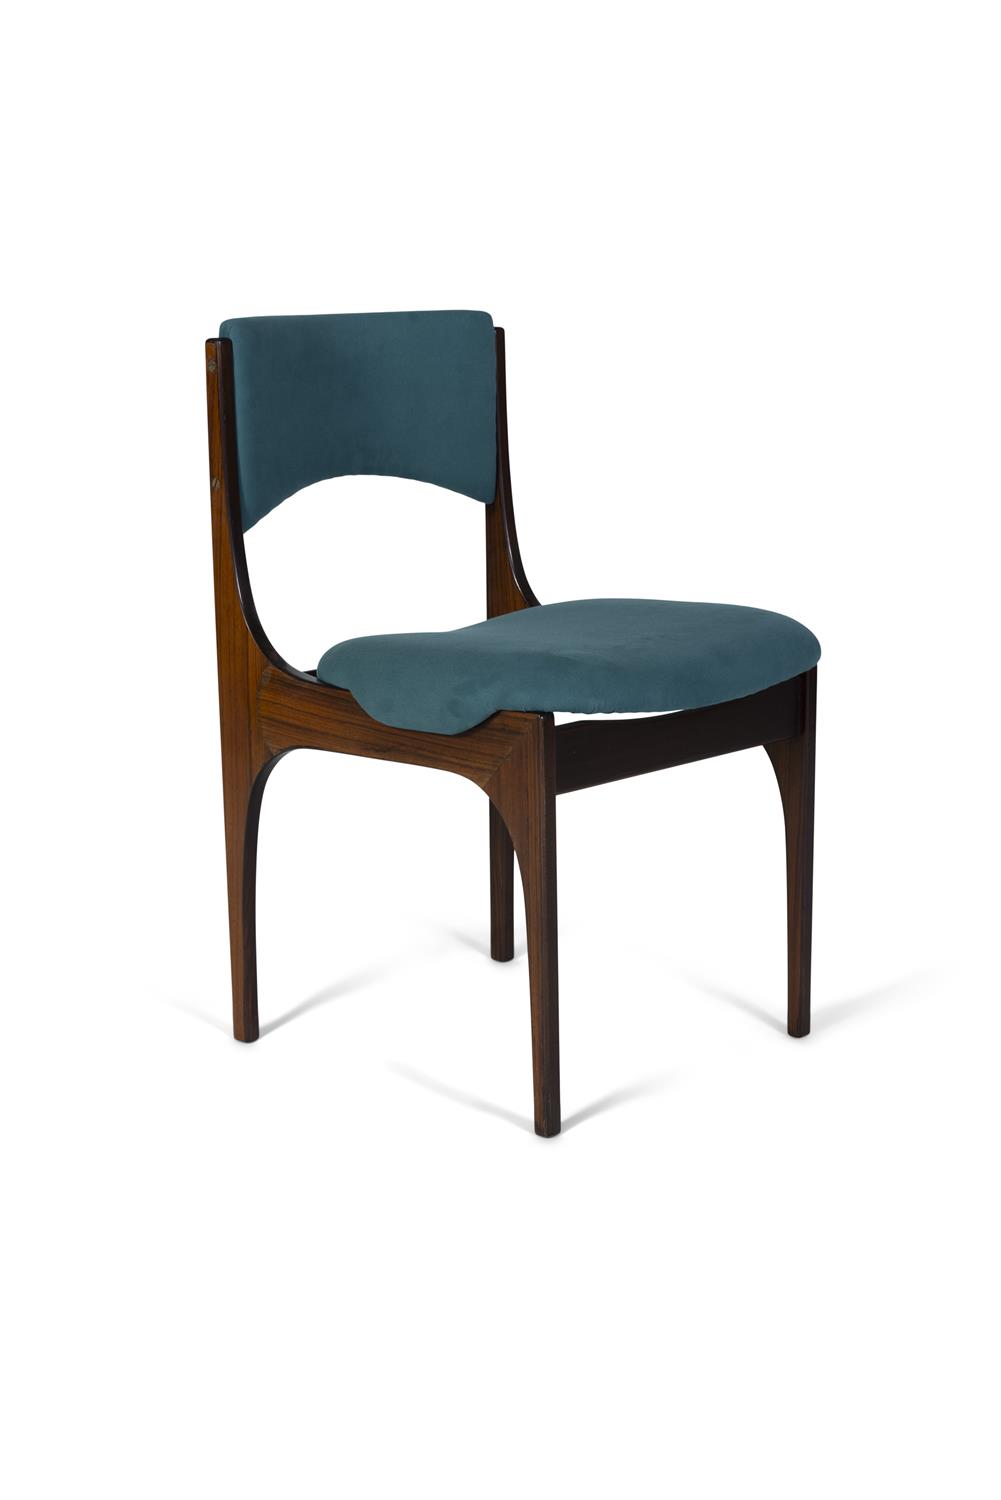 GIUSEPPE GIBELLI A set of six rosewood dining chairs by Giuseppe Gibelli for Sormani. Italy, c. - Image 5 of 7